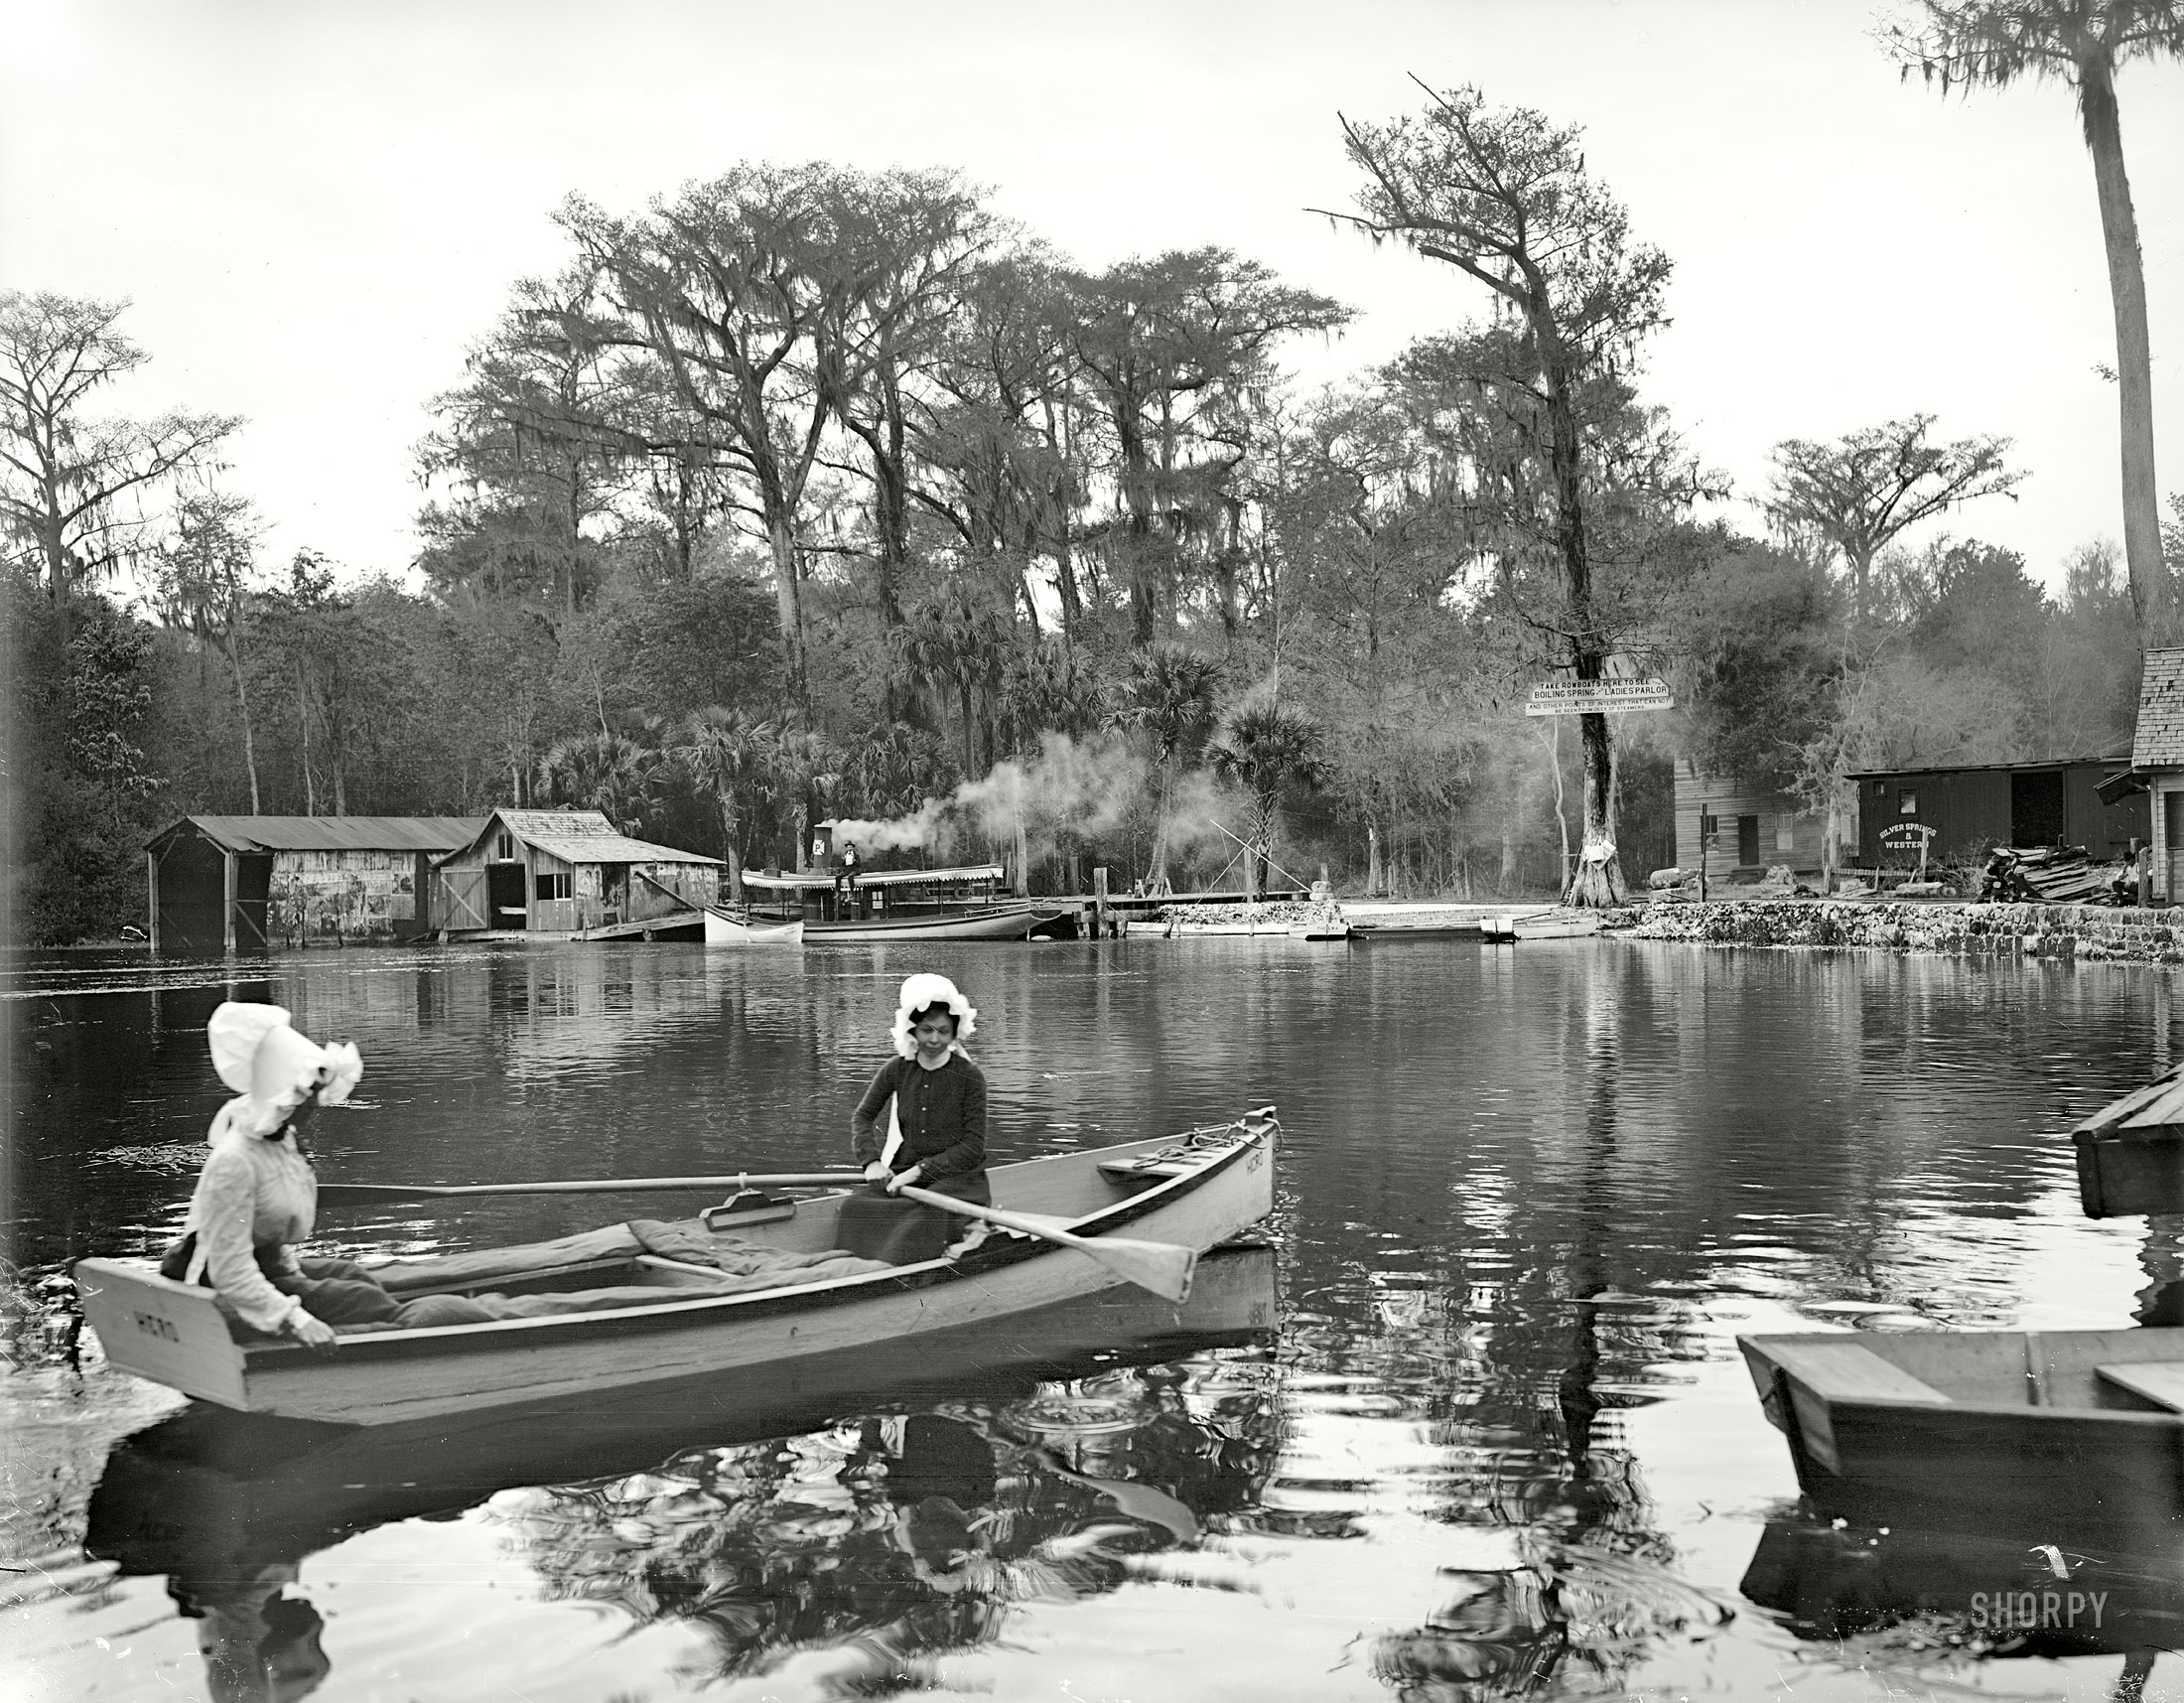 Florida circa 1902. "Silver Springs on the Oklawaha." Don't forget your flotation bonnets! Photo by William Henry Jackson, Detroit Publishing. View full size.